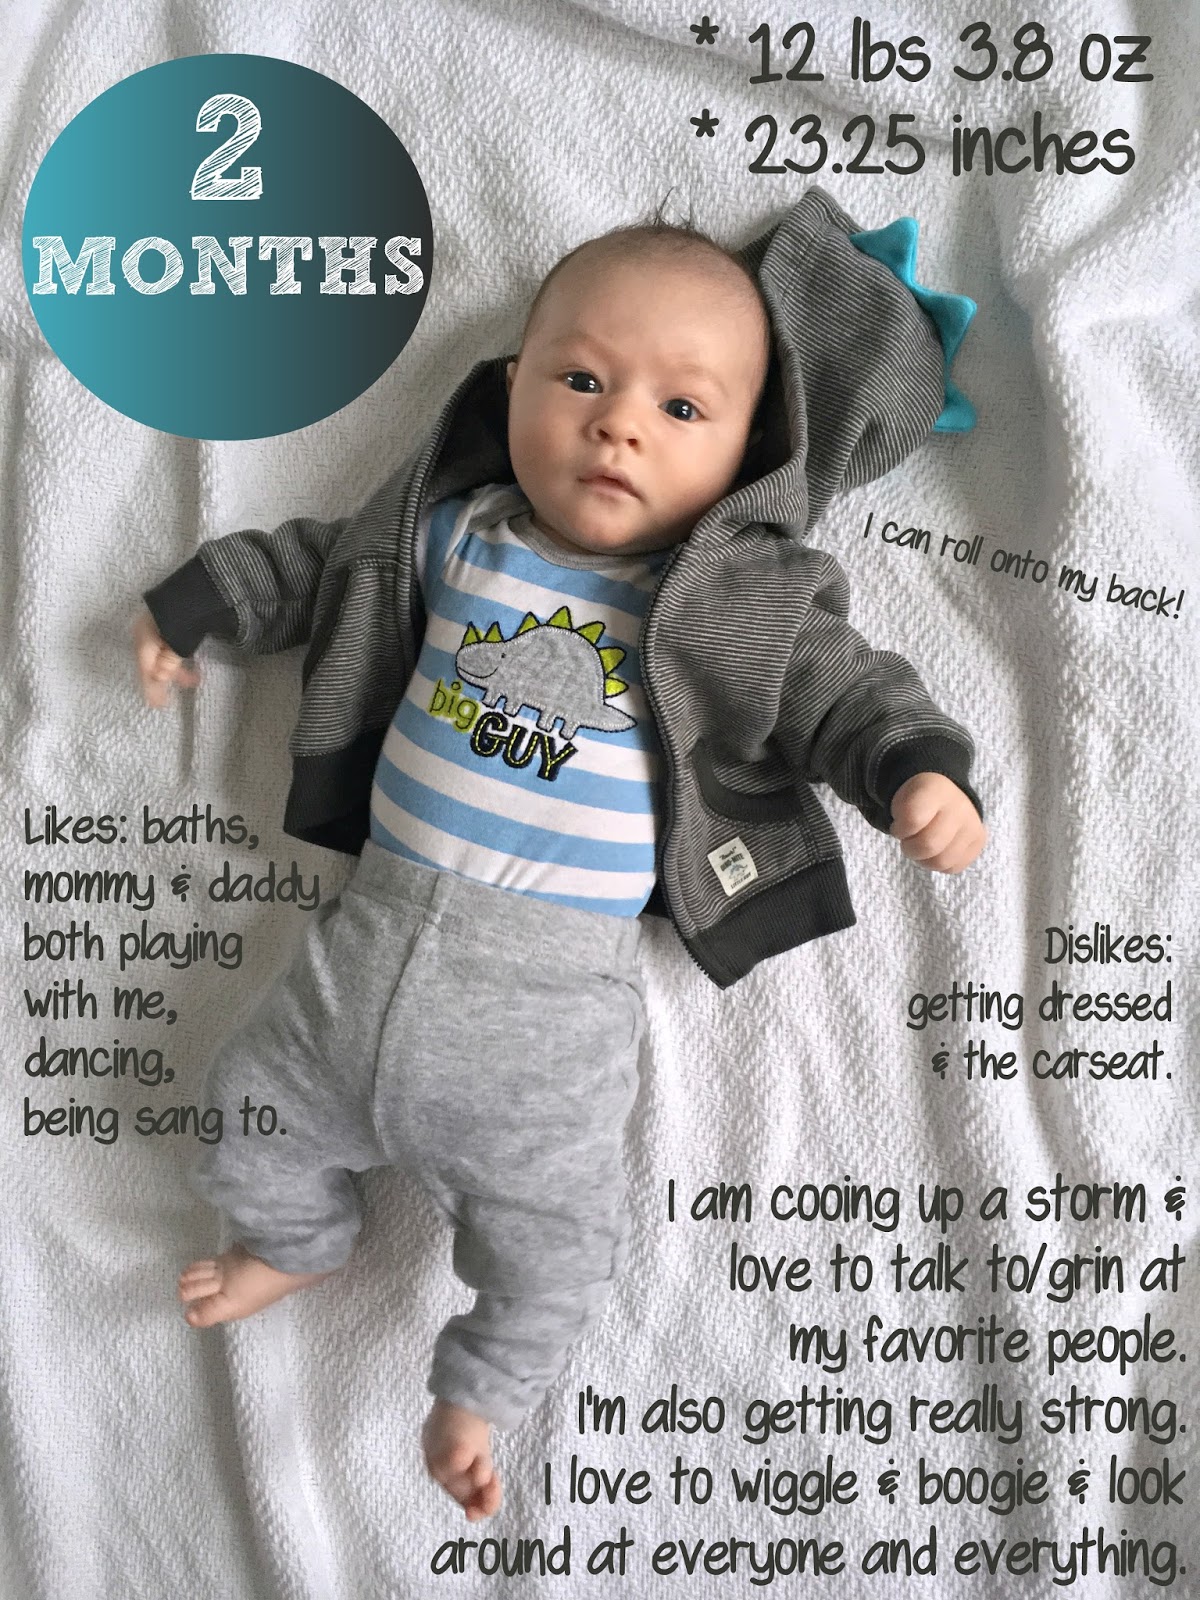 The Cooking Actress: James-2 Months!